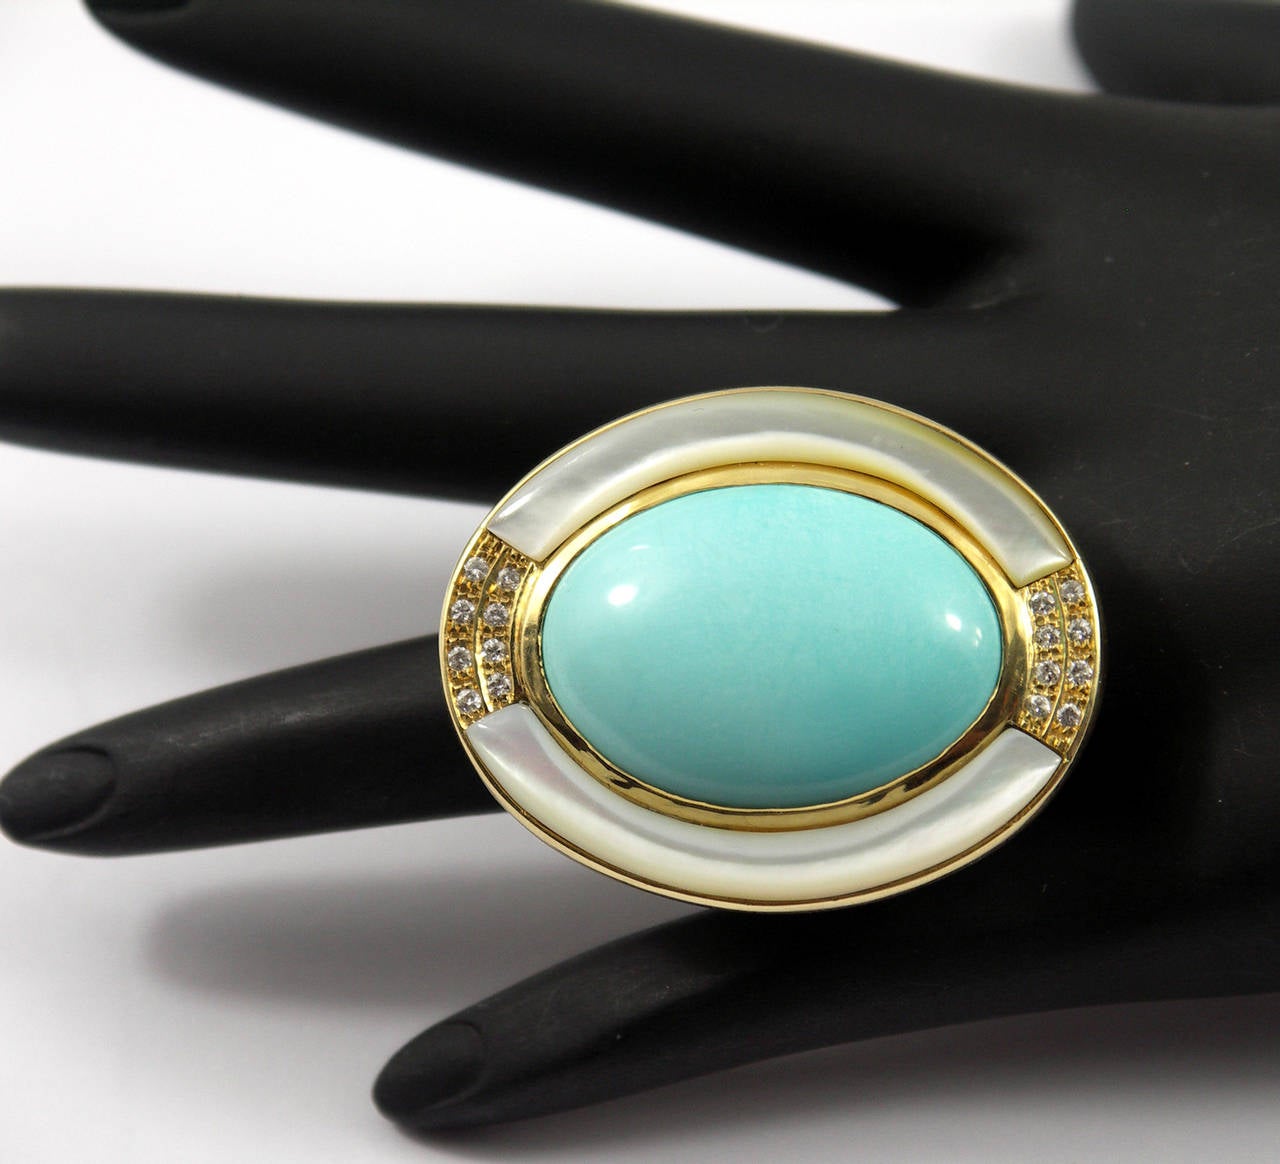 One 18K yellow gold ring measuring 1 3/4 inches long, by 1 1/4 inches wide. Centered around an oval cabochon turquoise measuring 30mm X 22mm. The turquoise is bordered on the East and West by mother of pearl, and bordered by 0.20ct of round